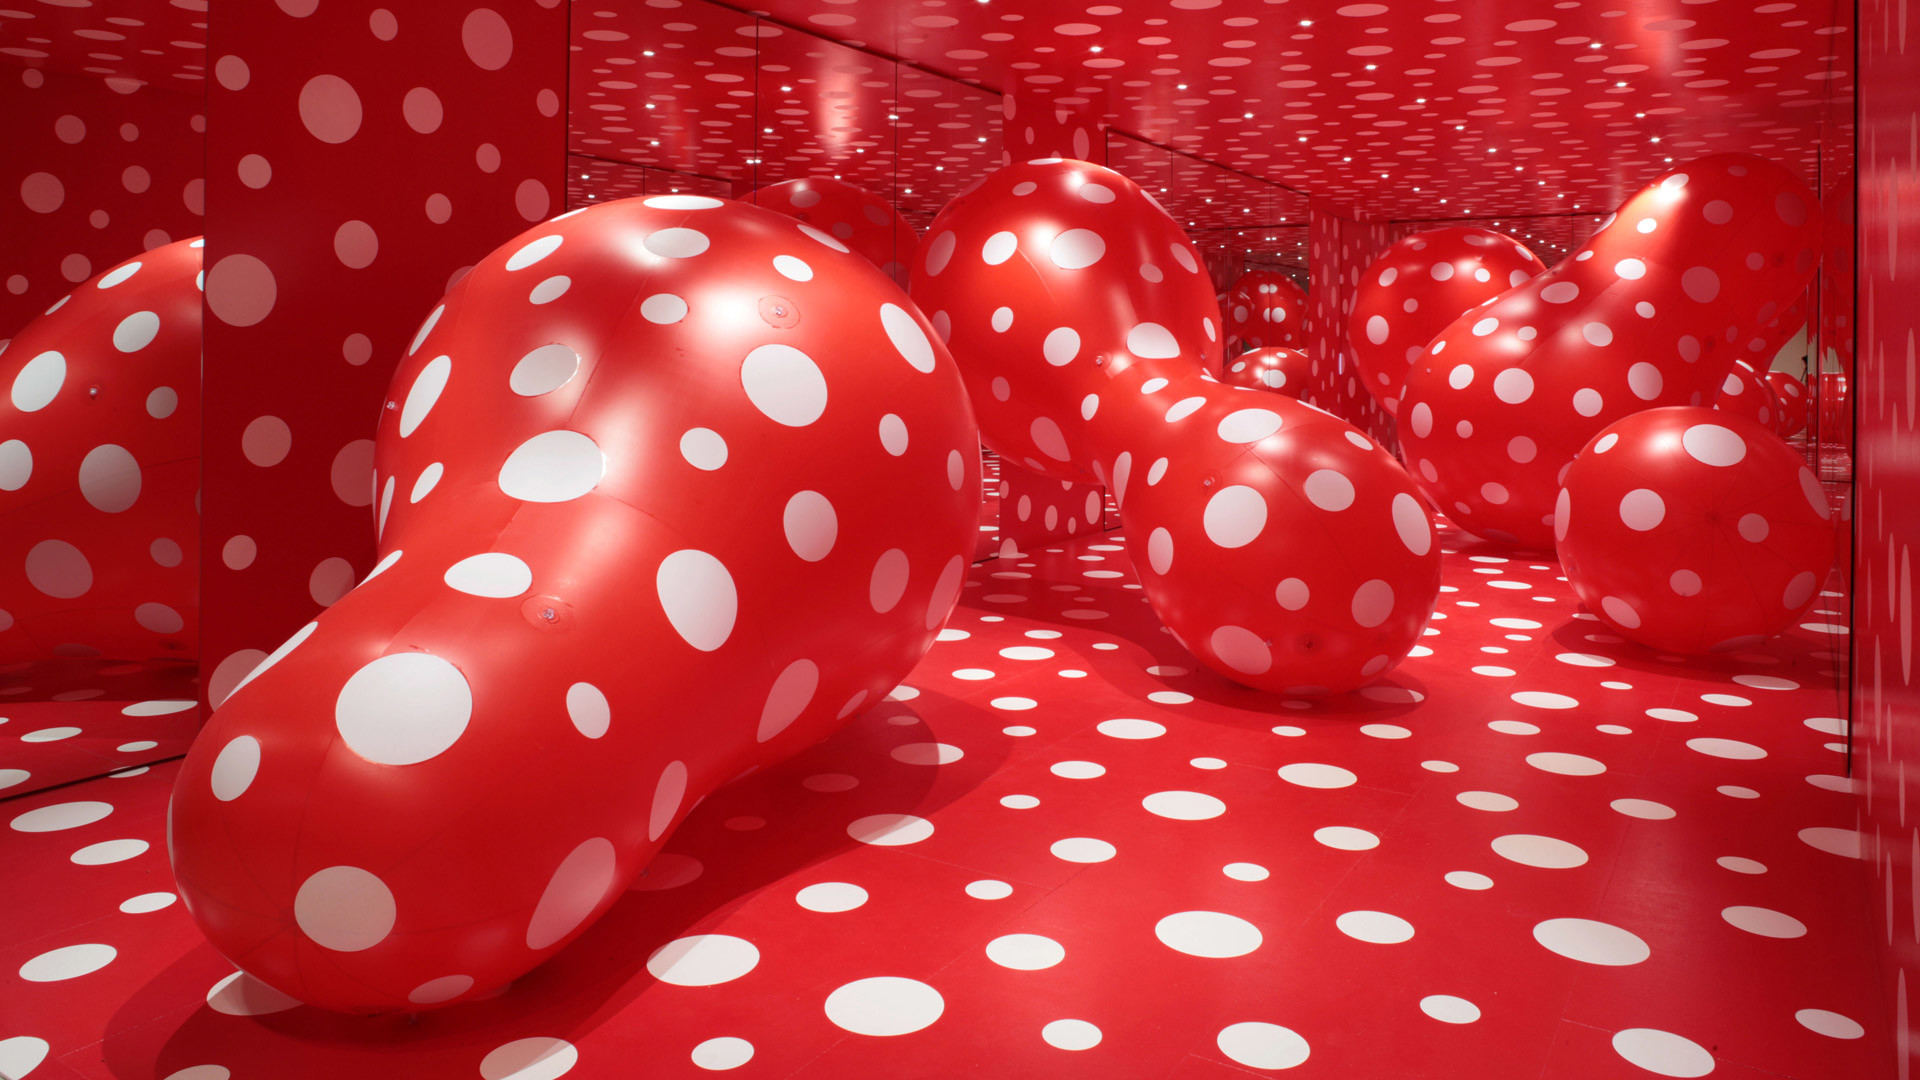 1920x1080 look now see forever-yayoi kusama-mental health. “